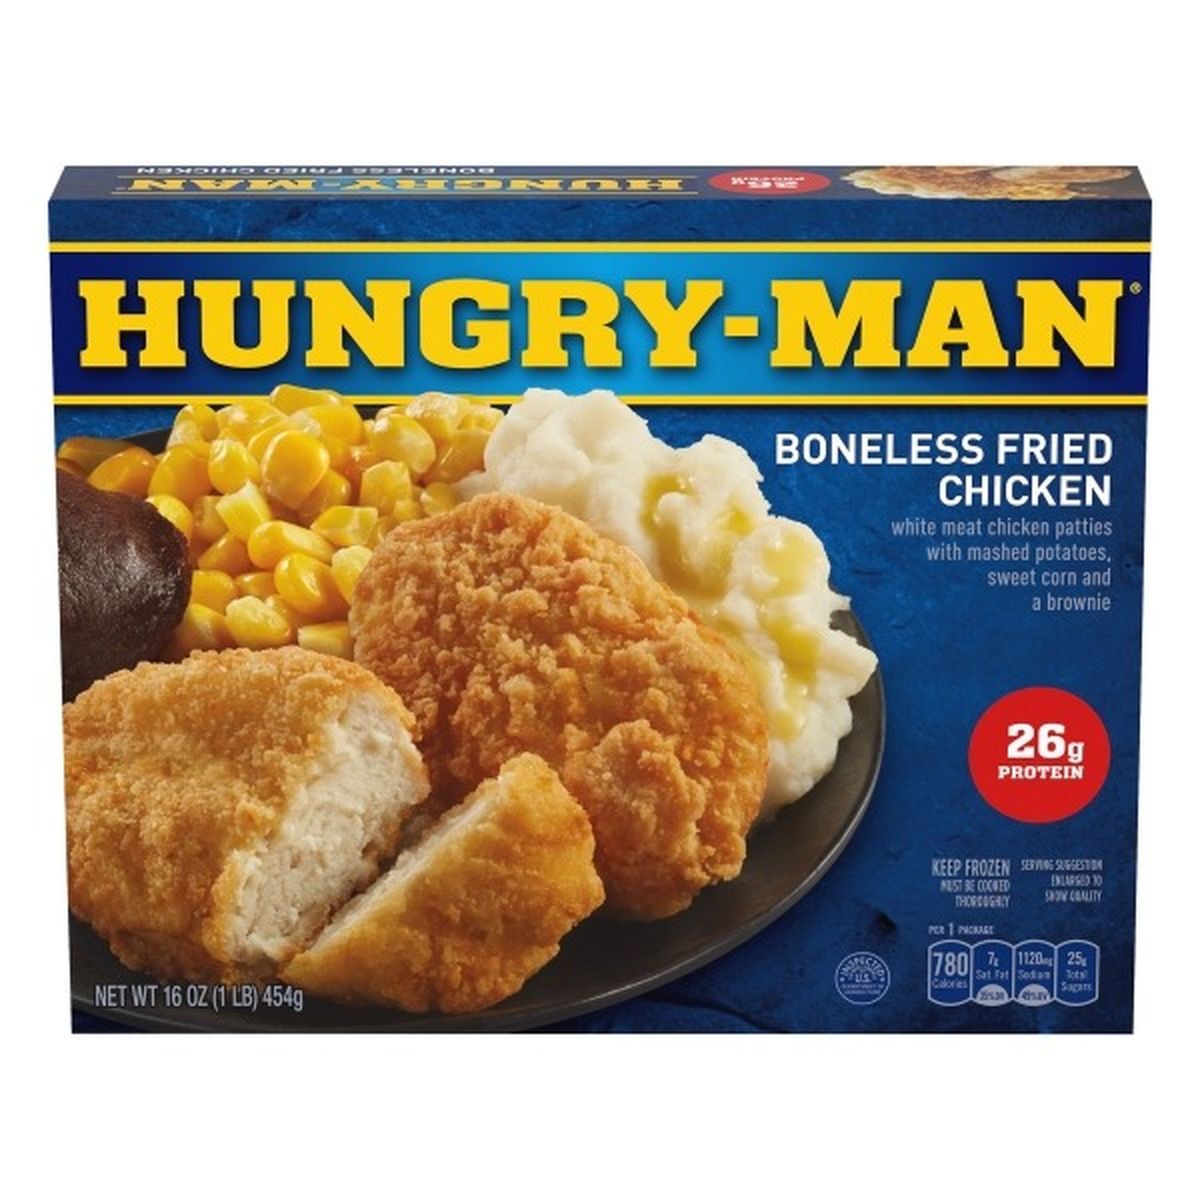 Calories in Hungry-Man Boneless  Fried Chicken